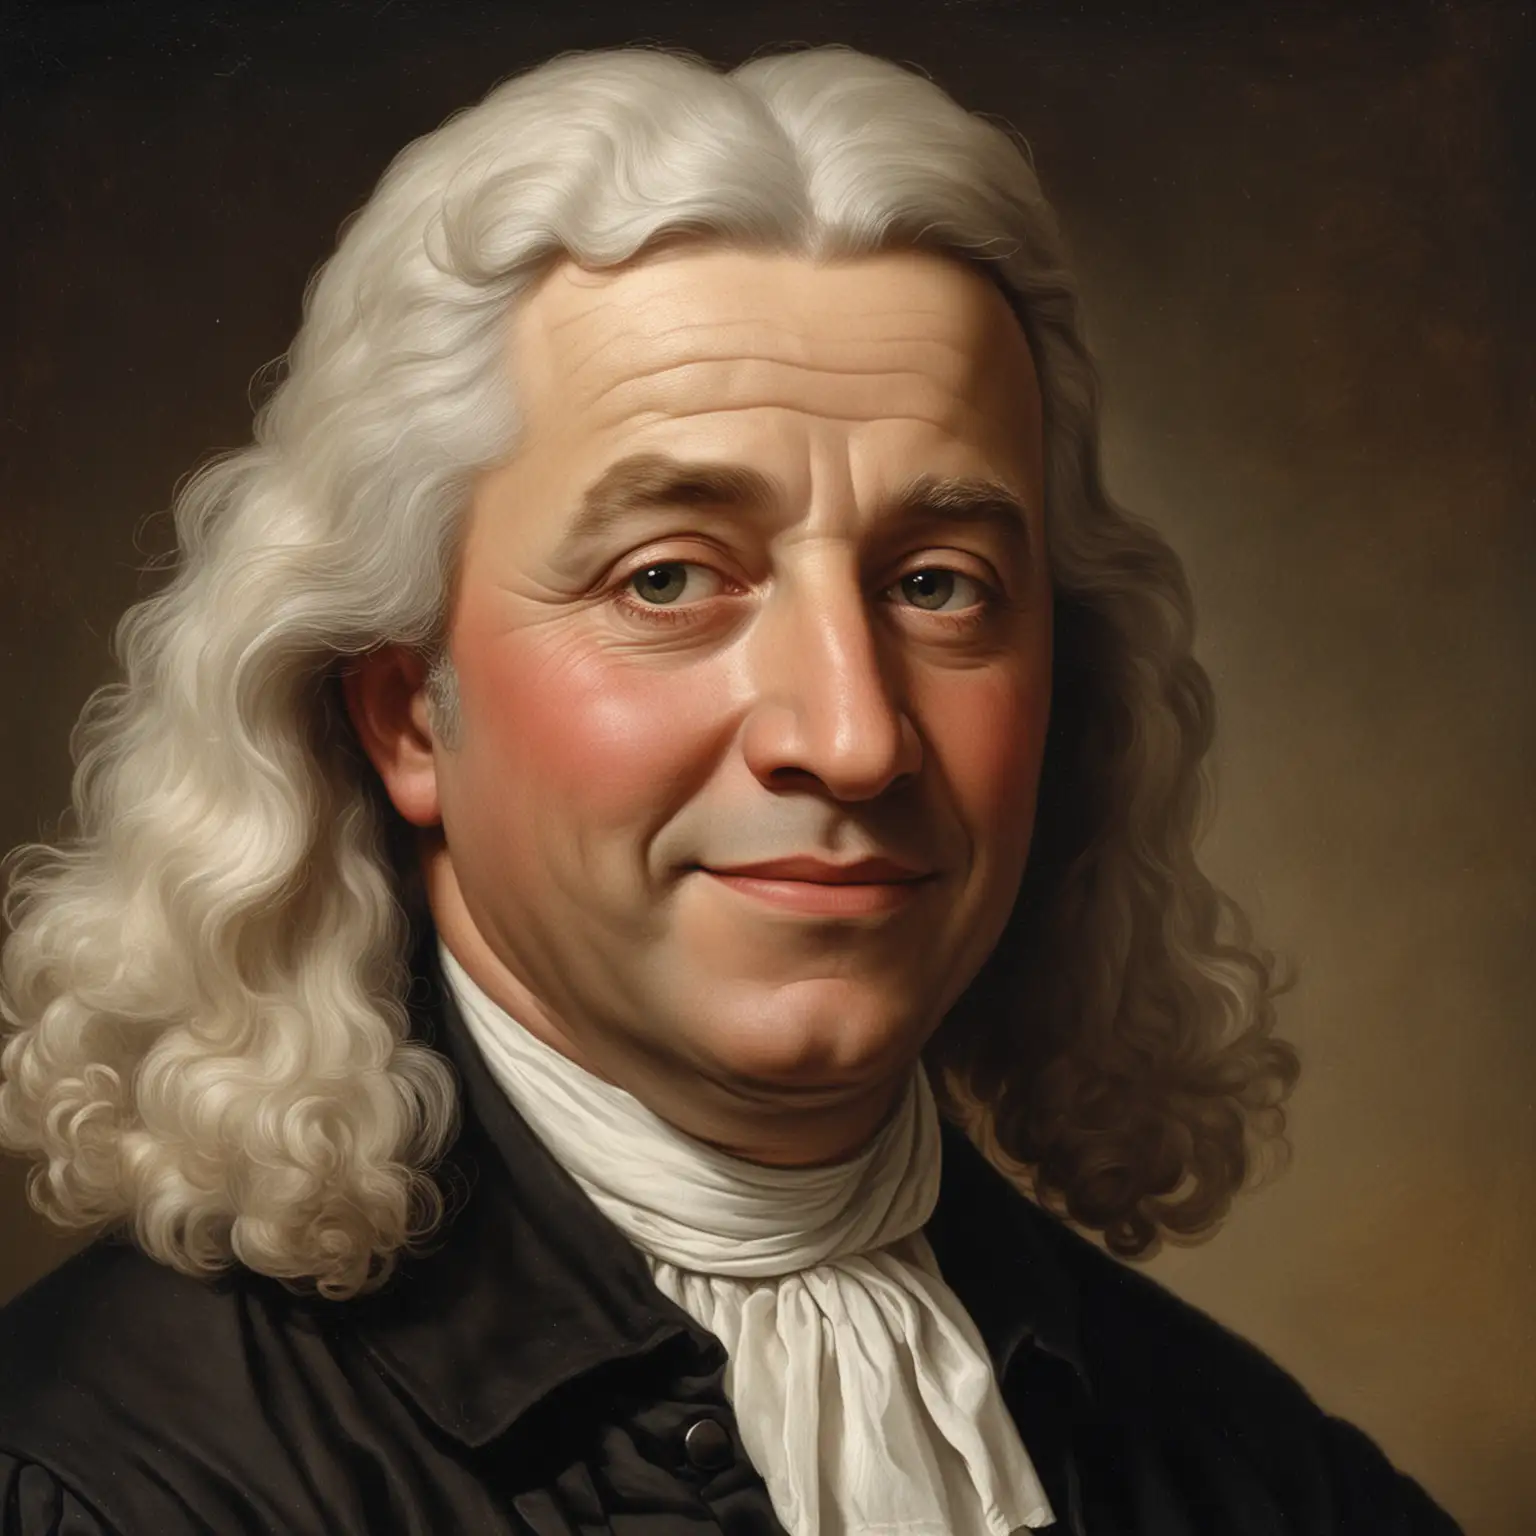 an histortc paintings of "charles wesley", at age 65, same hair and face as the source image, 1700's painting

